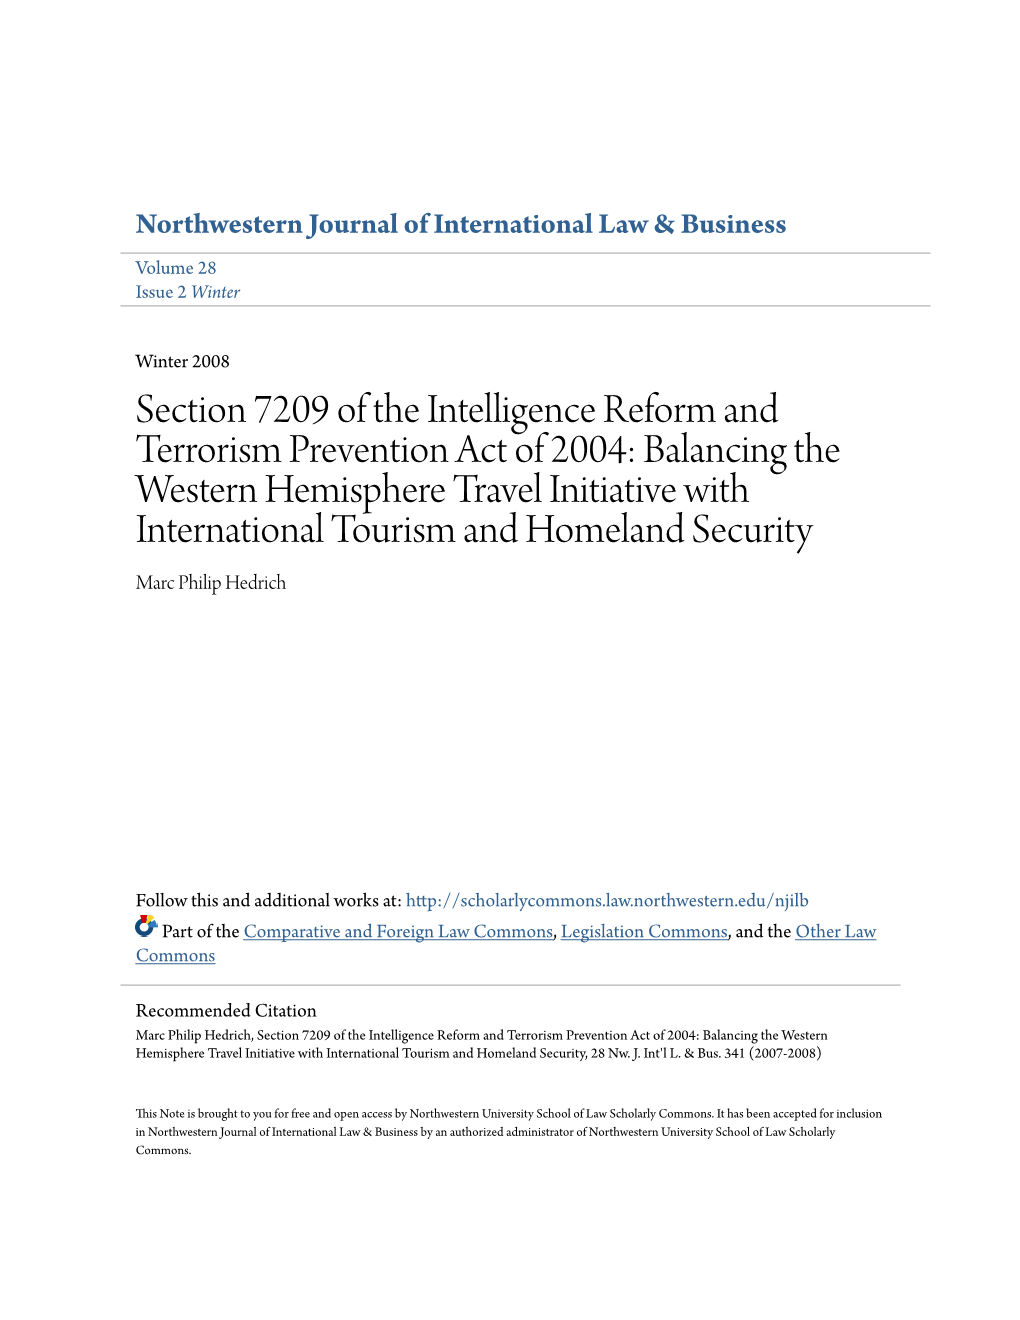 Section 7209 of the Intelligence Reform and Terrorism